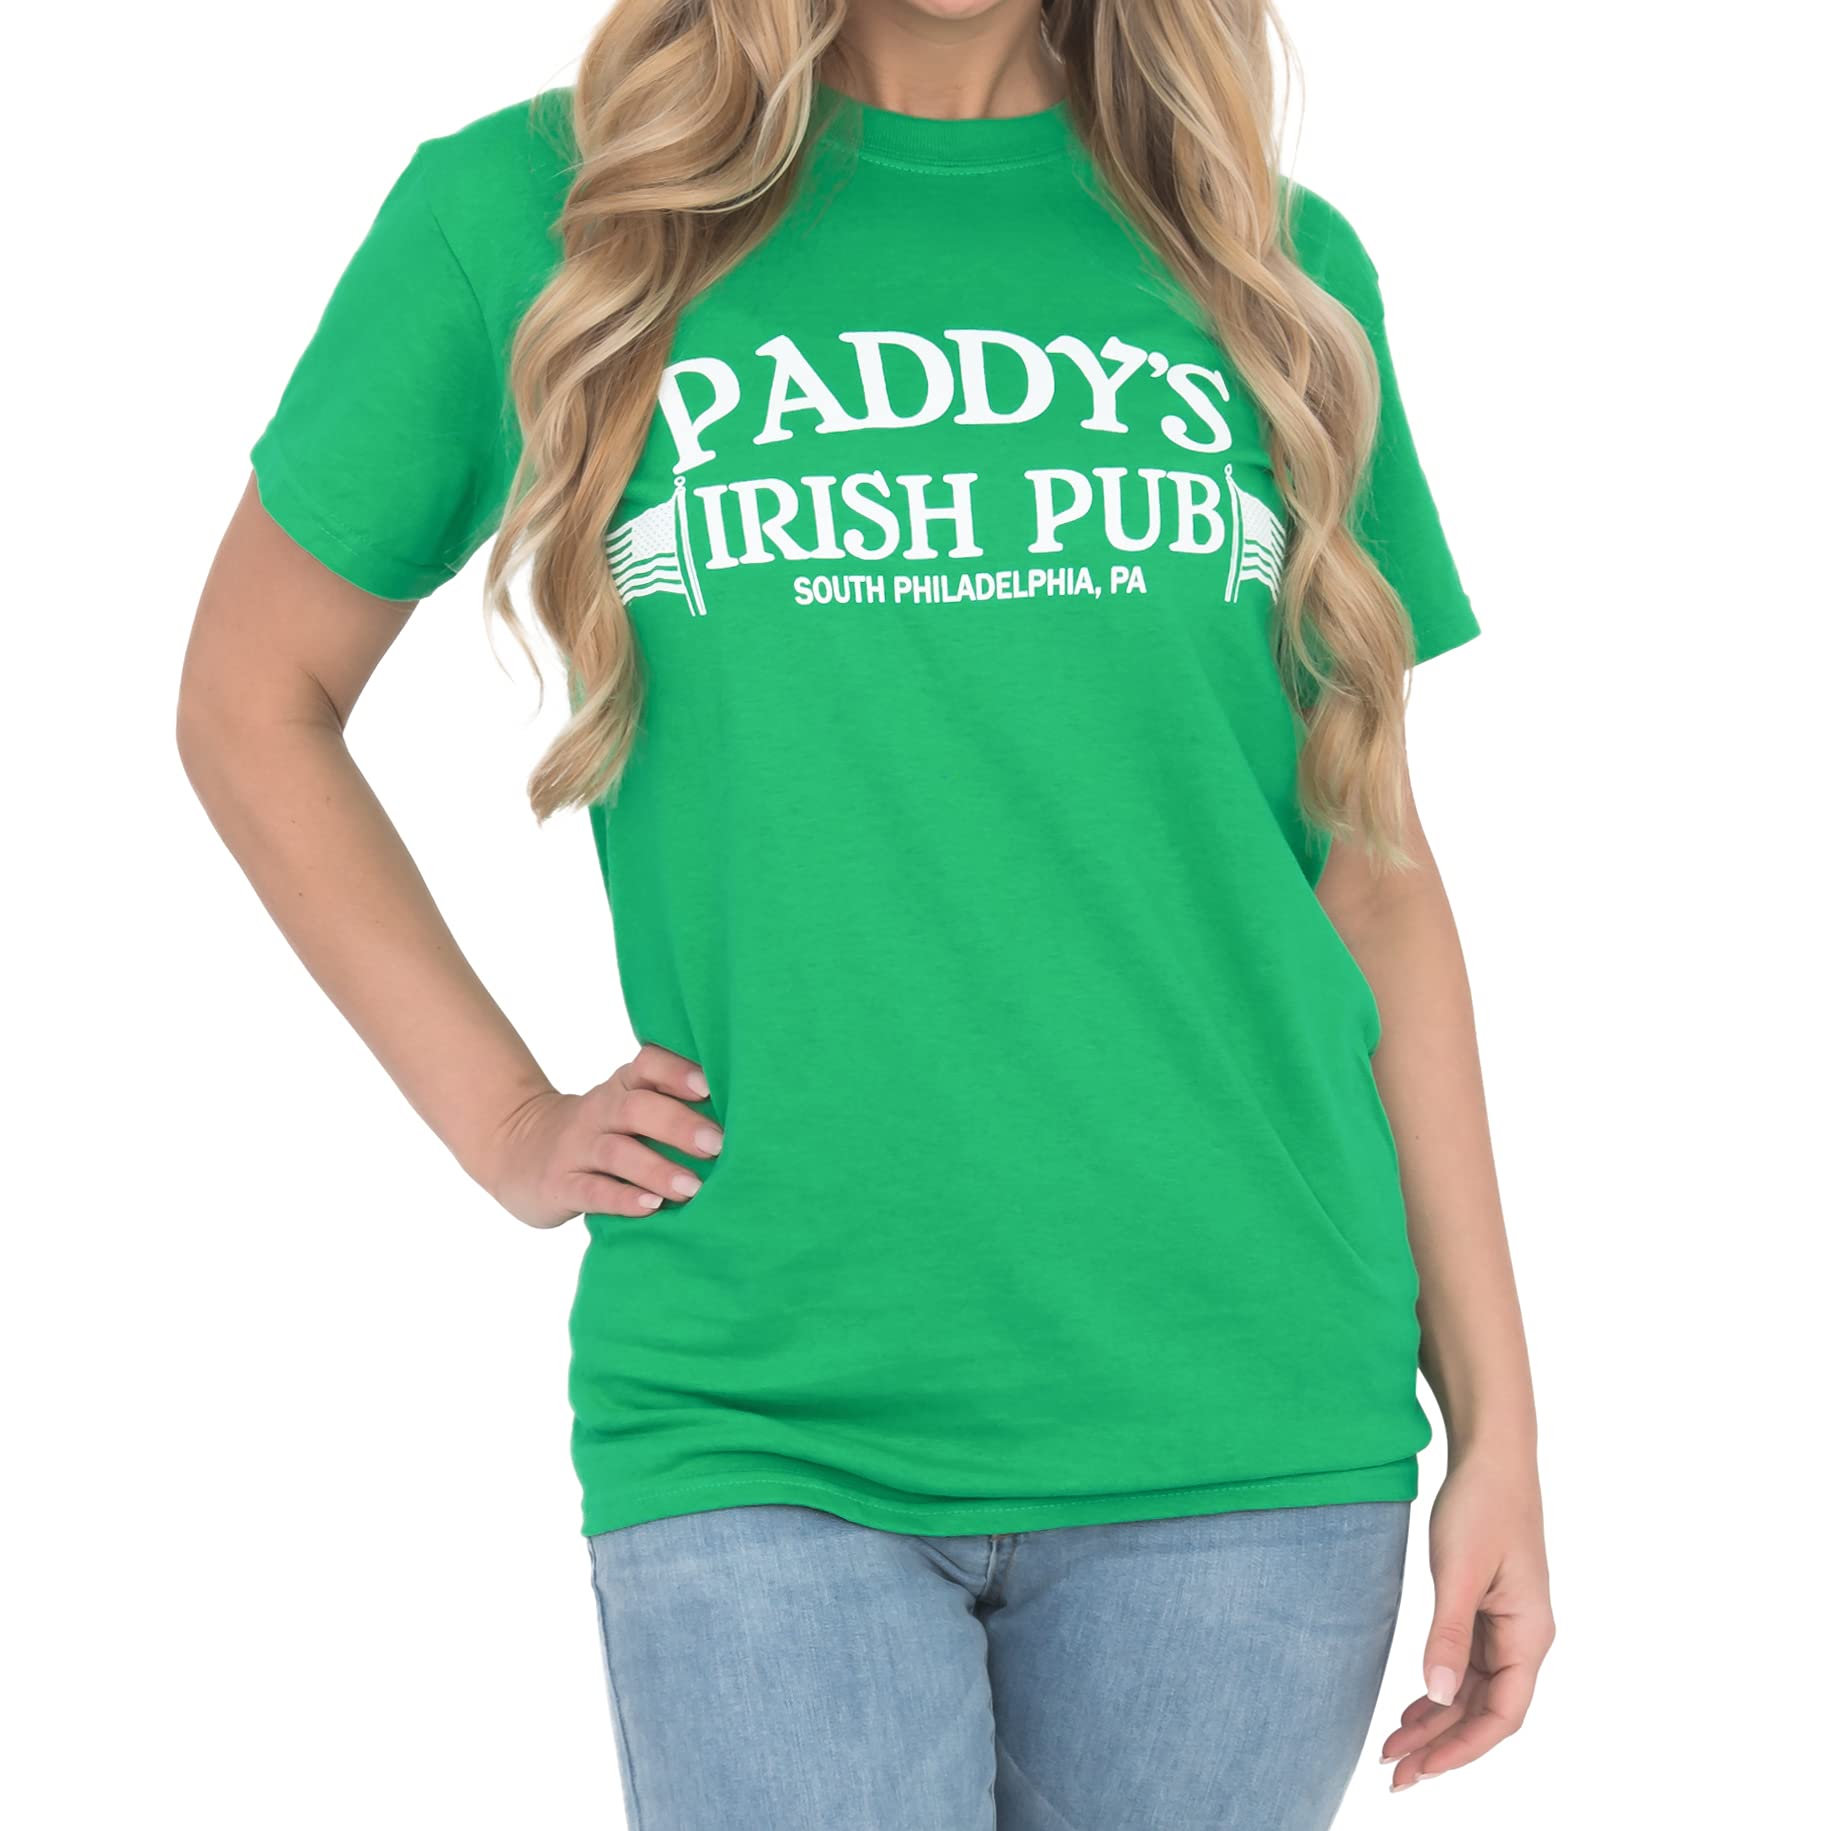 It's Always Sunny in Philadelphia Paddy's Irish Pub Adult TV T-Shirt Officially Licensed by Ripple Junction